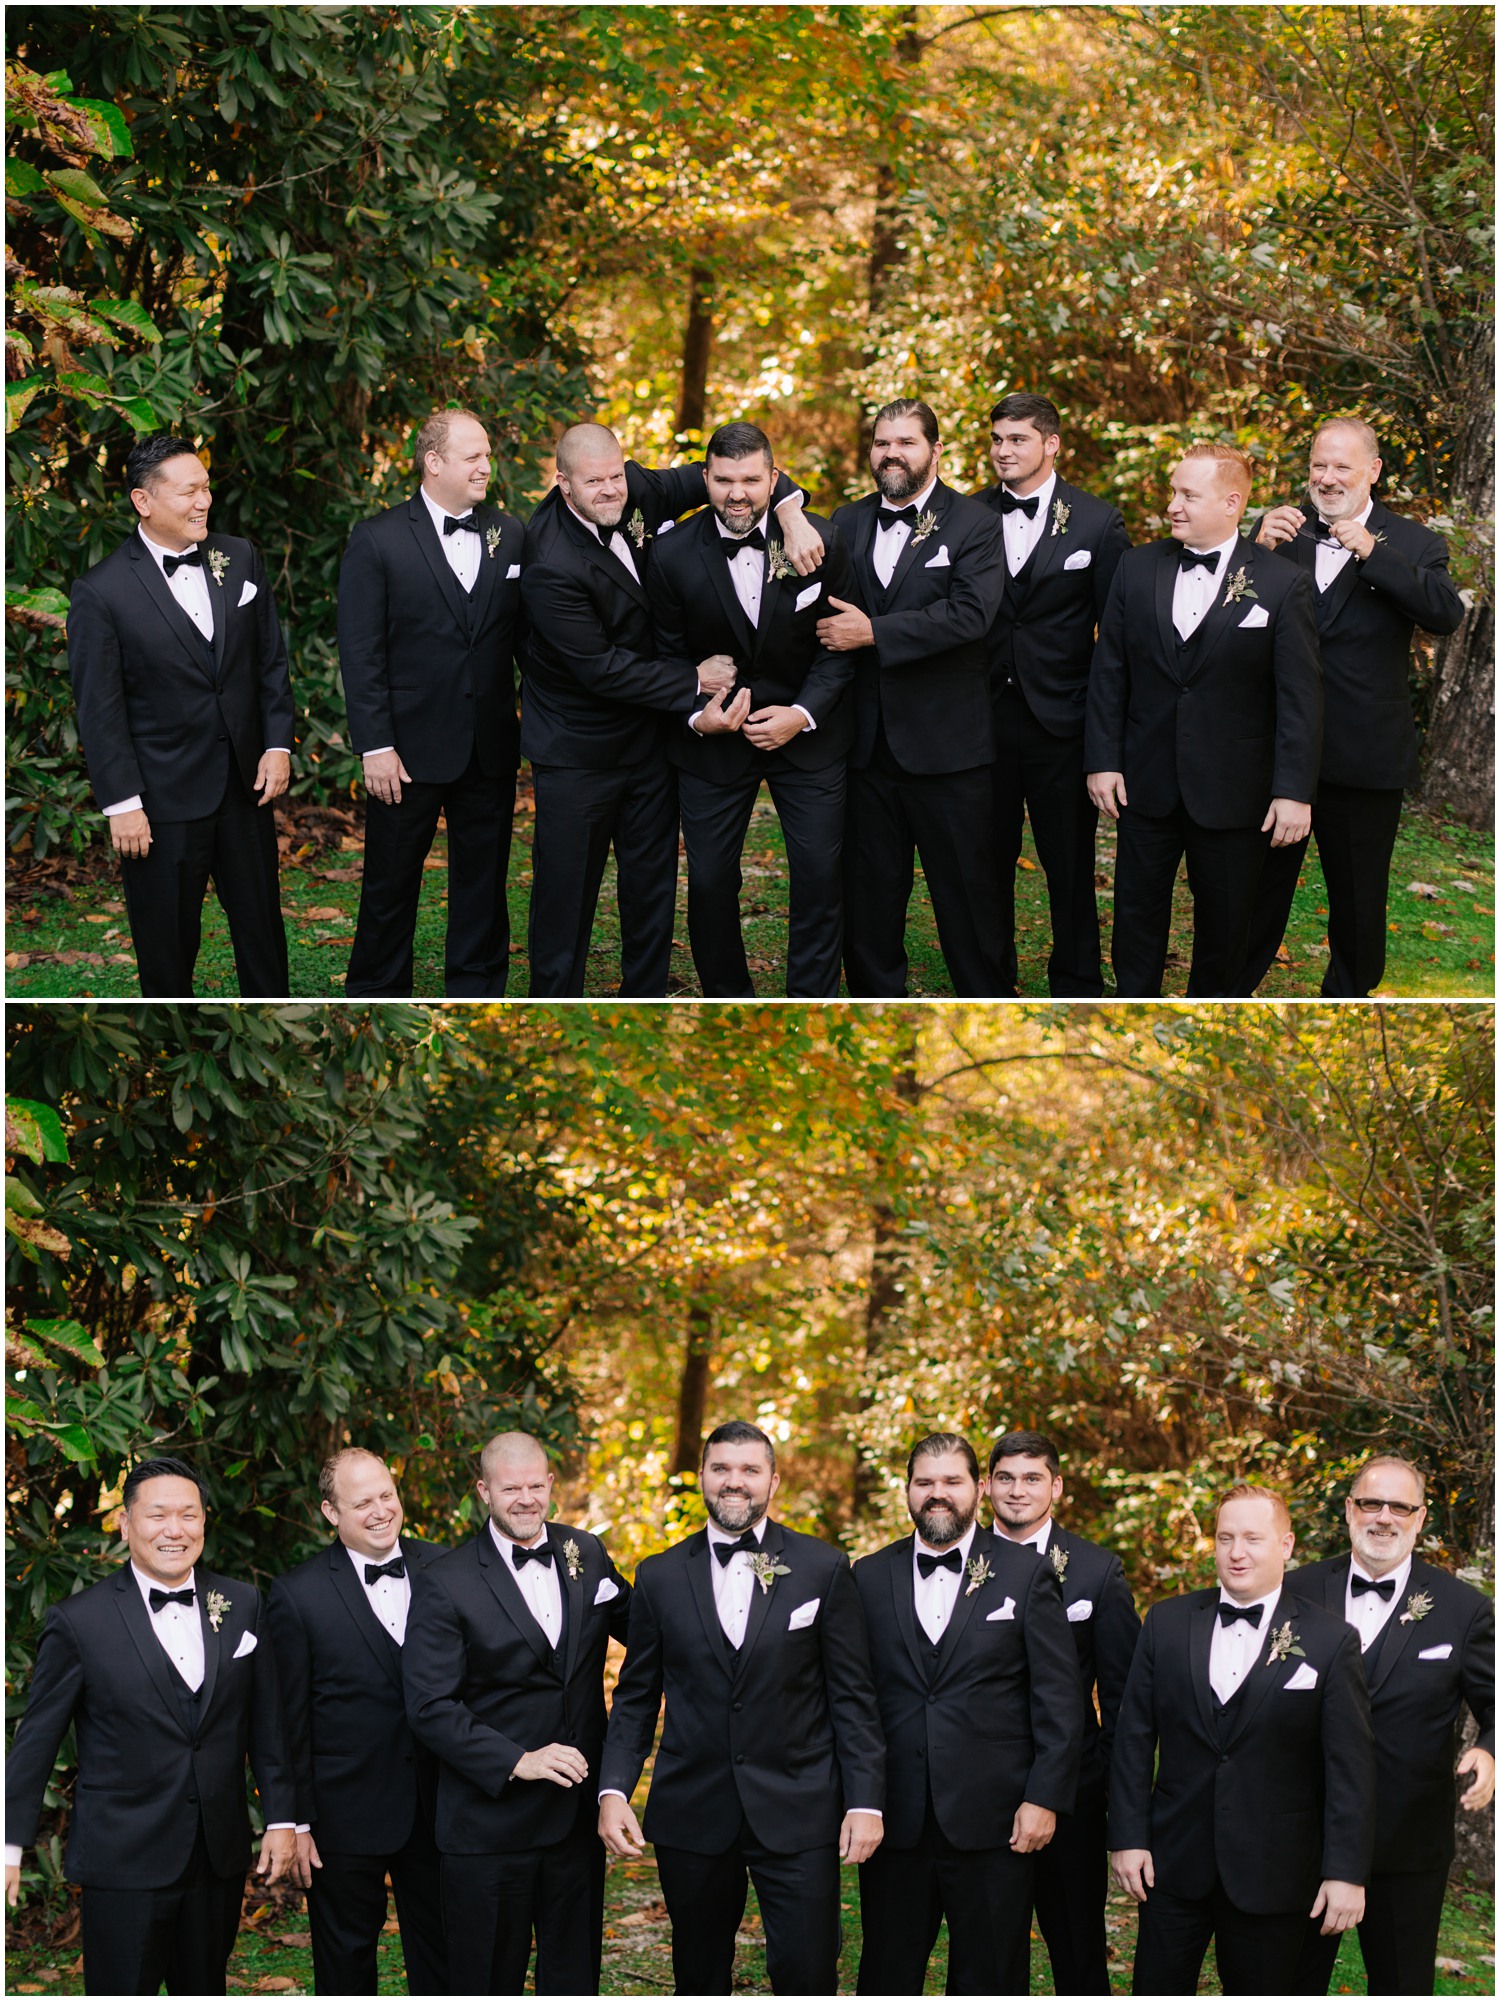 groomsmen wrestle with groom during portraits in classic tuxes